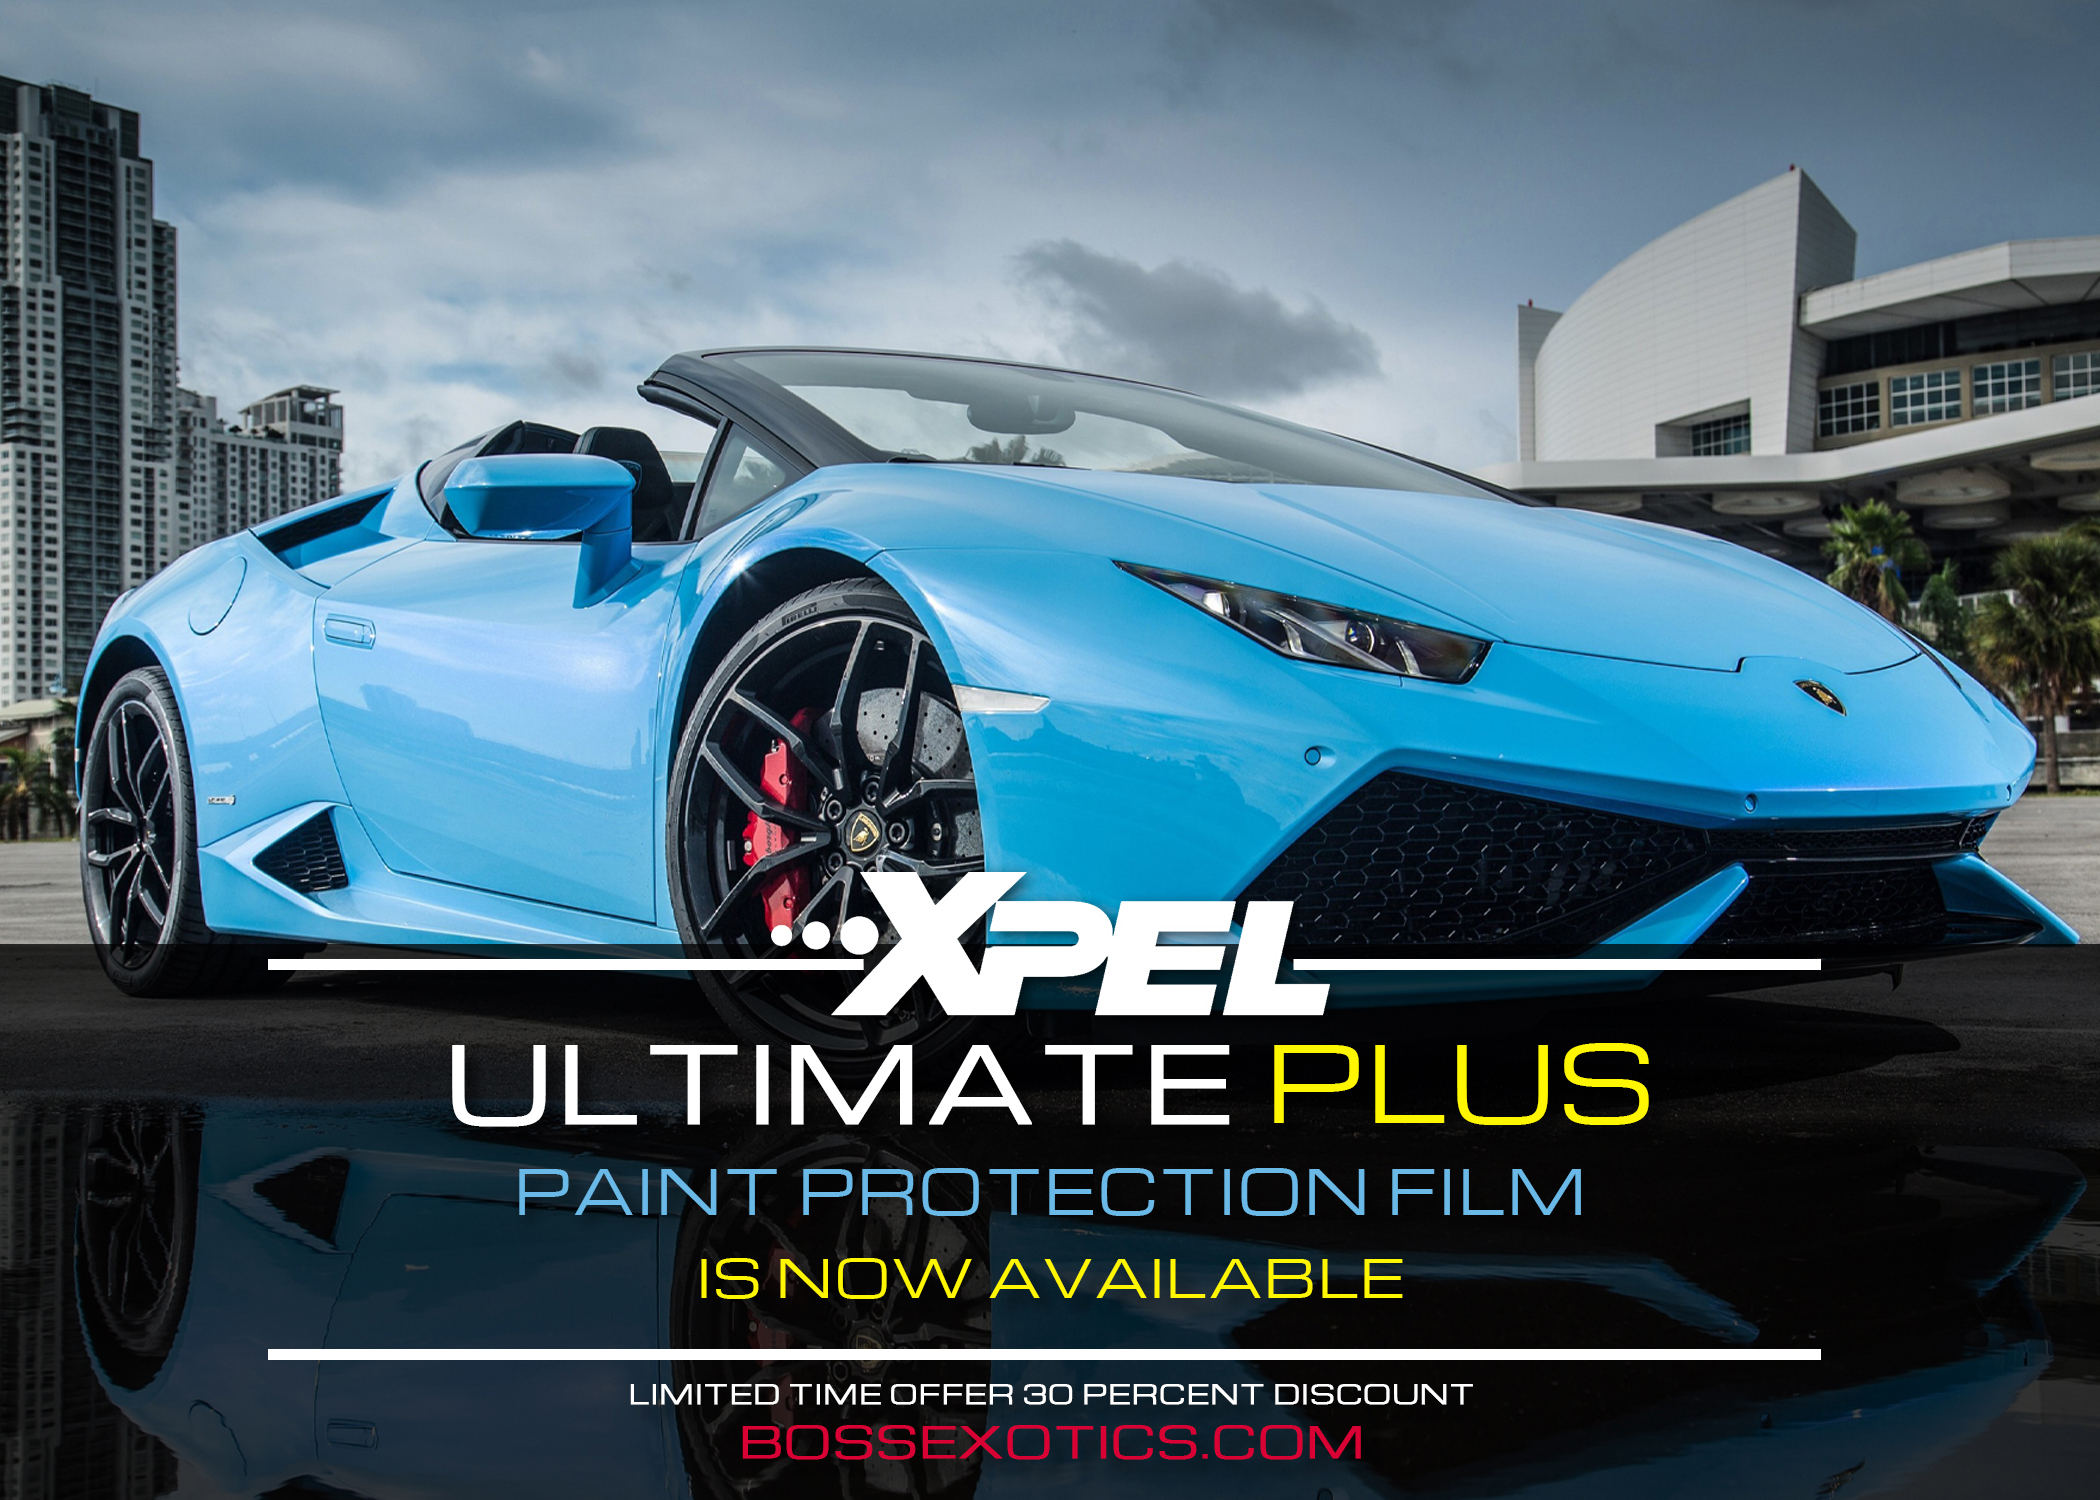 XPEL Paint Protection Film